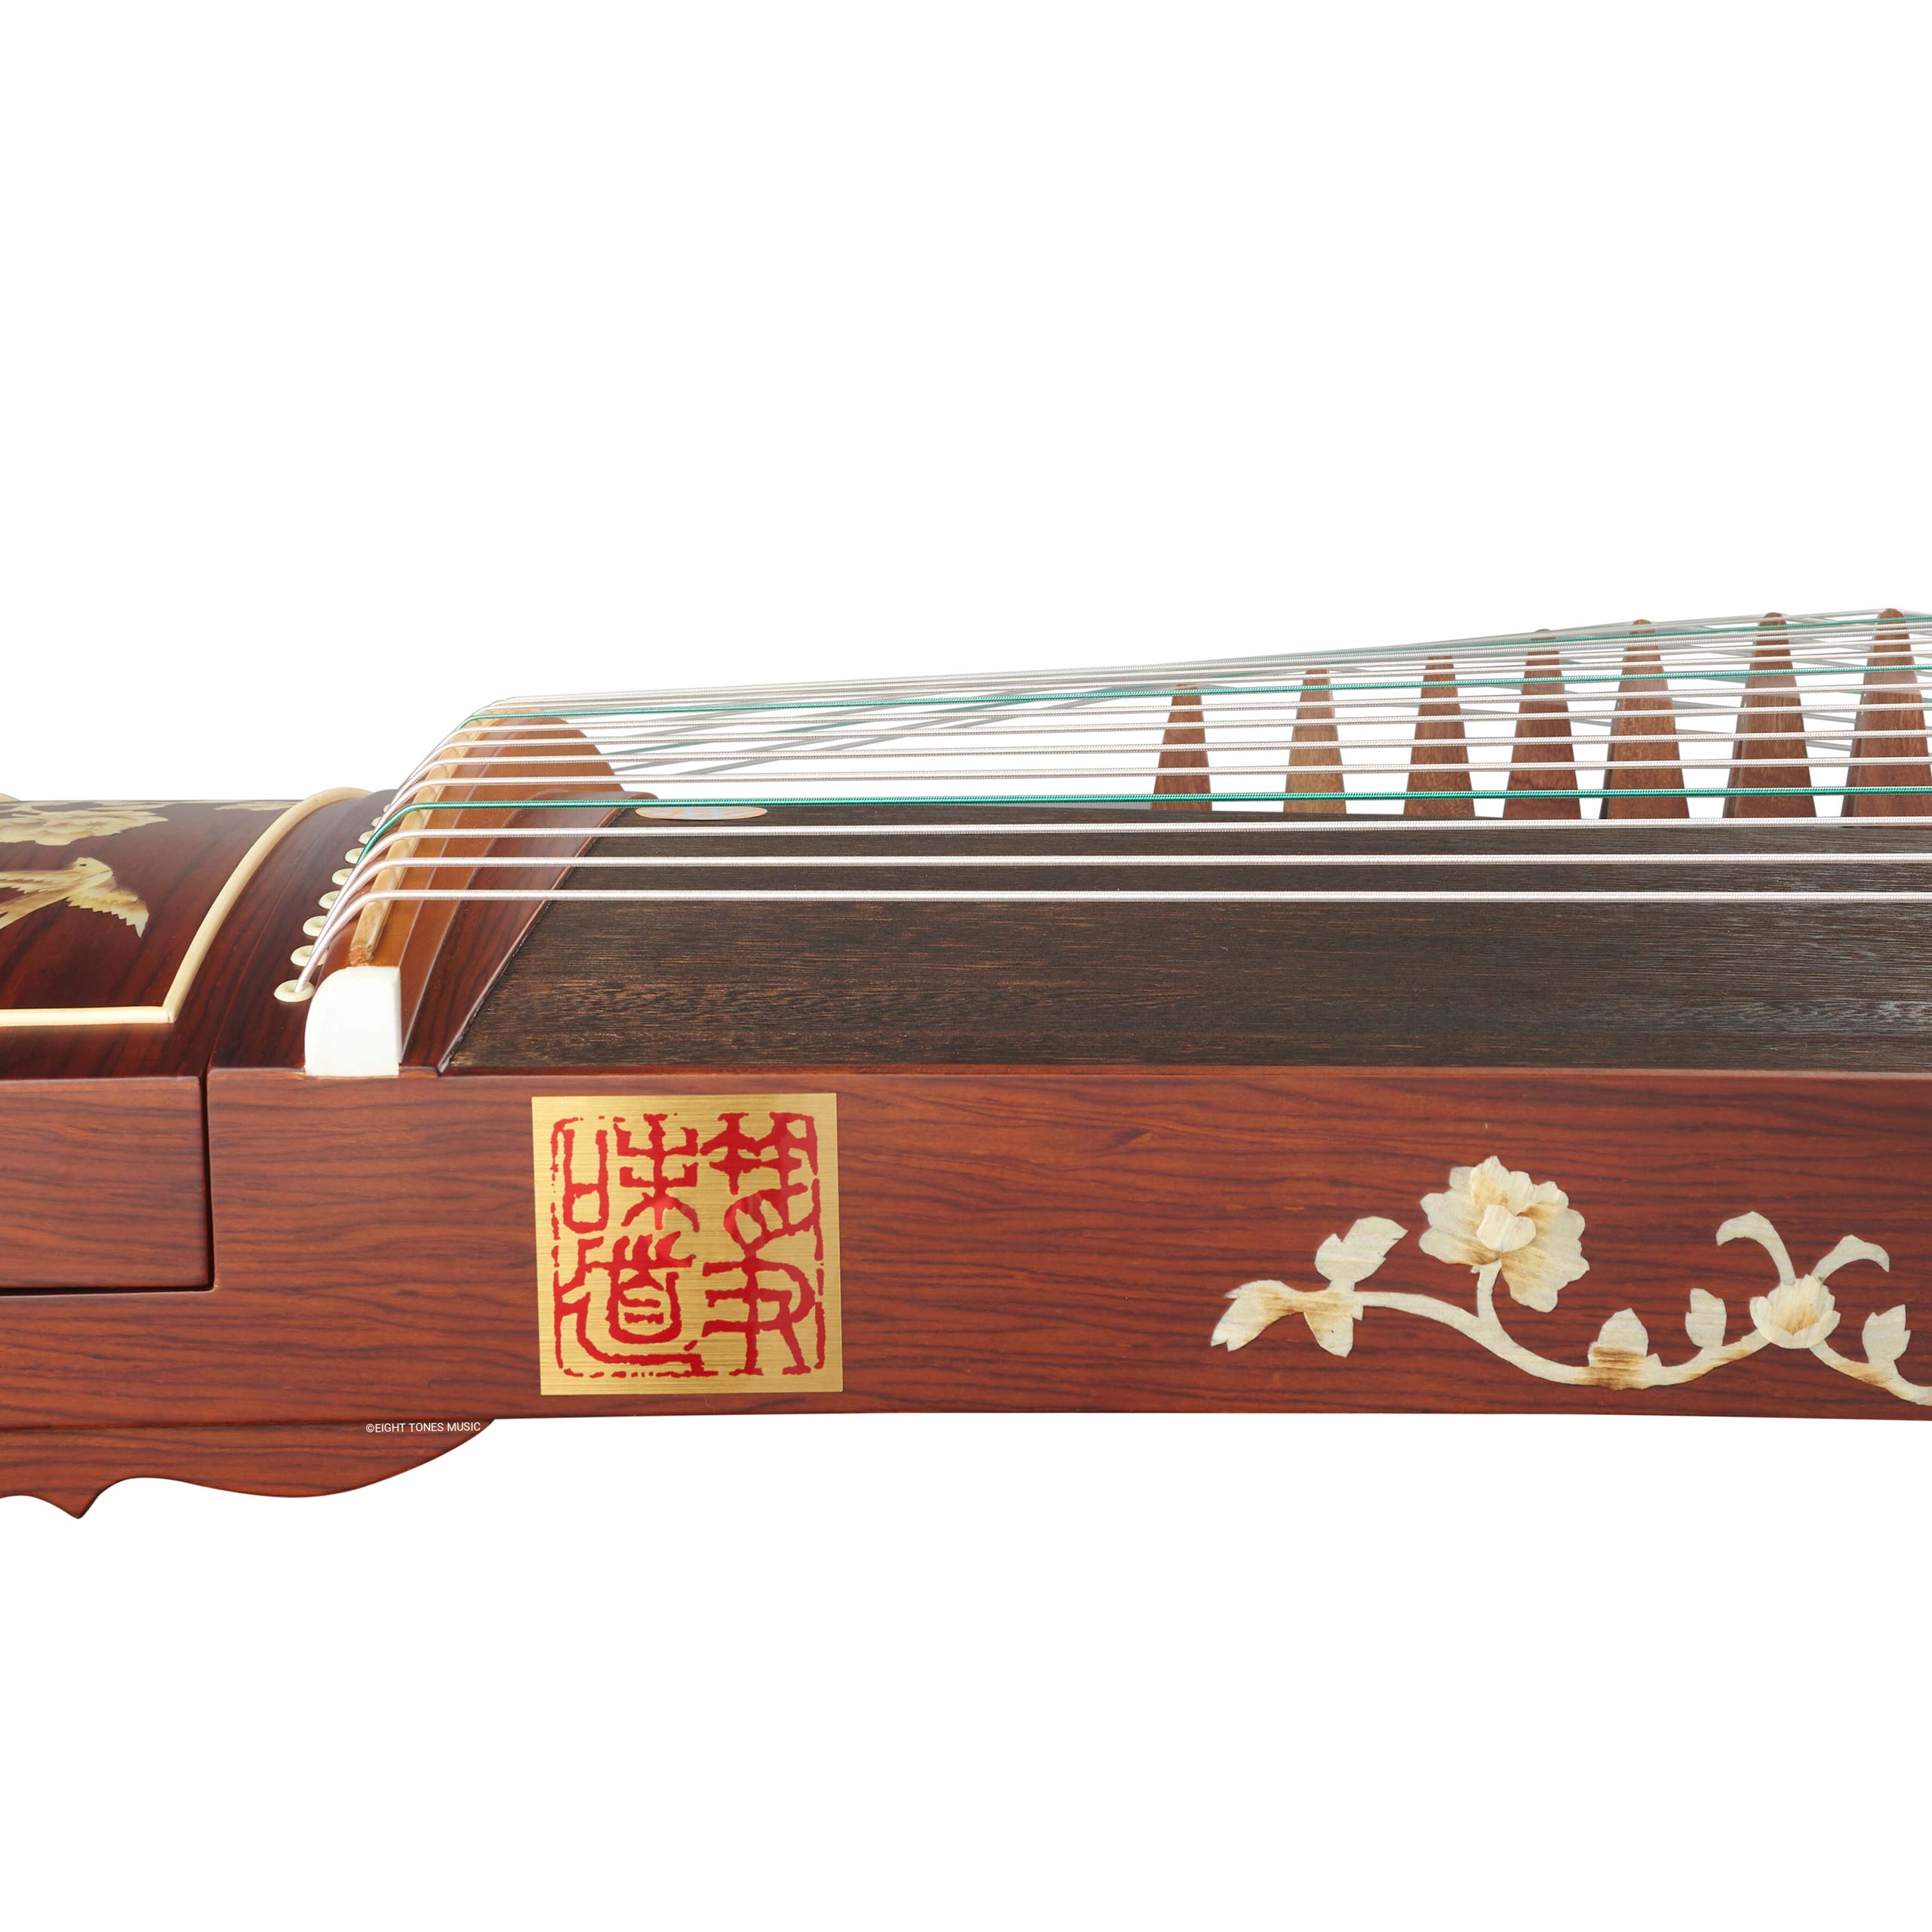 Zhonghao Magpie In Spring Guzheng Sideboard with brand